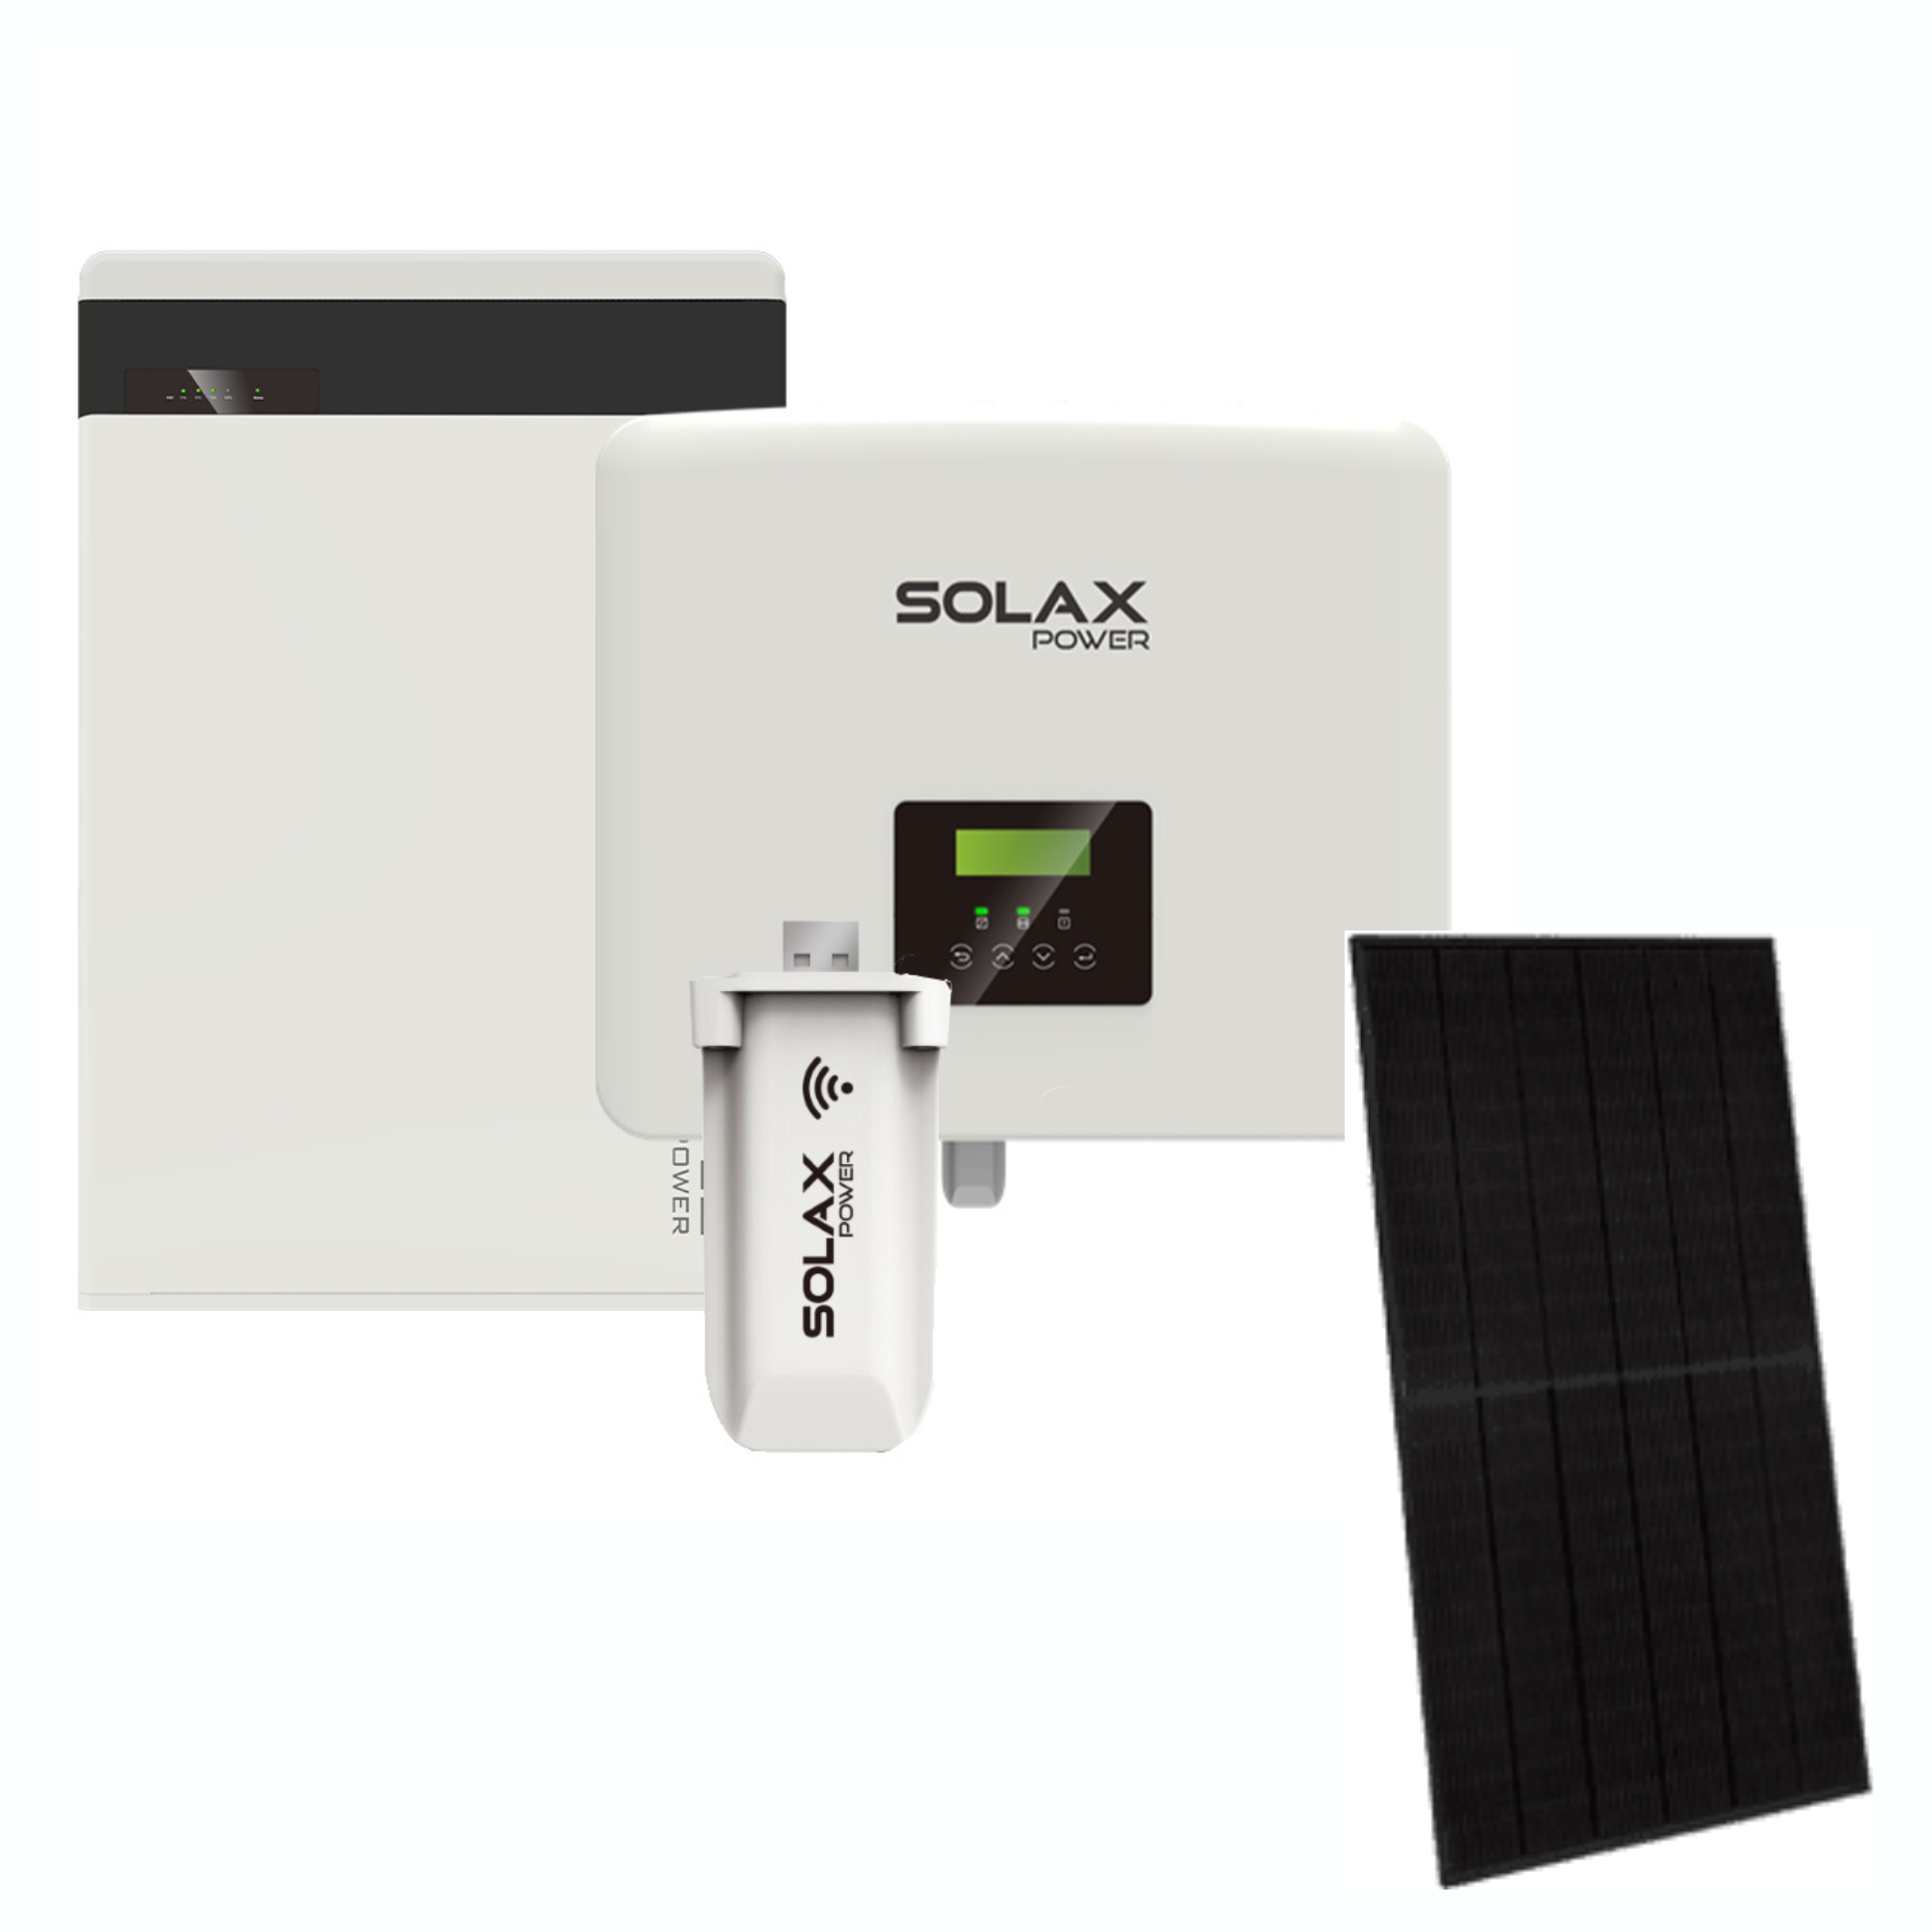 Solar PV System Package 1